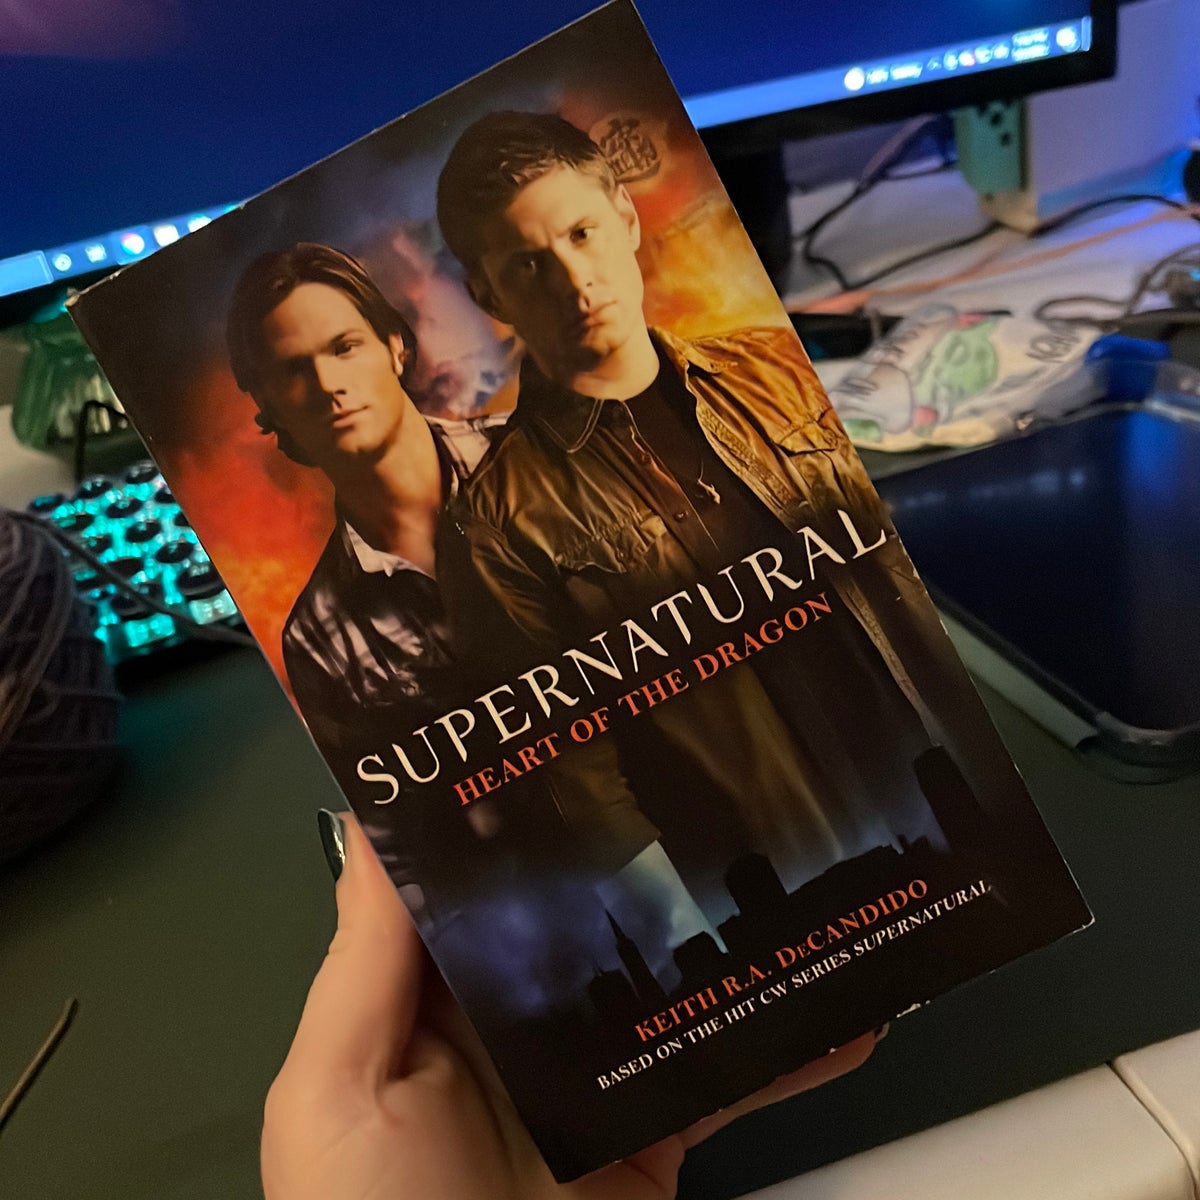 Supernatural - Heart of the Dragon by Keith R. A. DeCandido